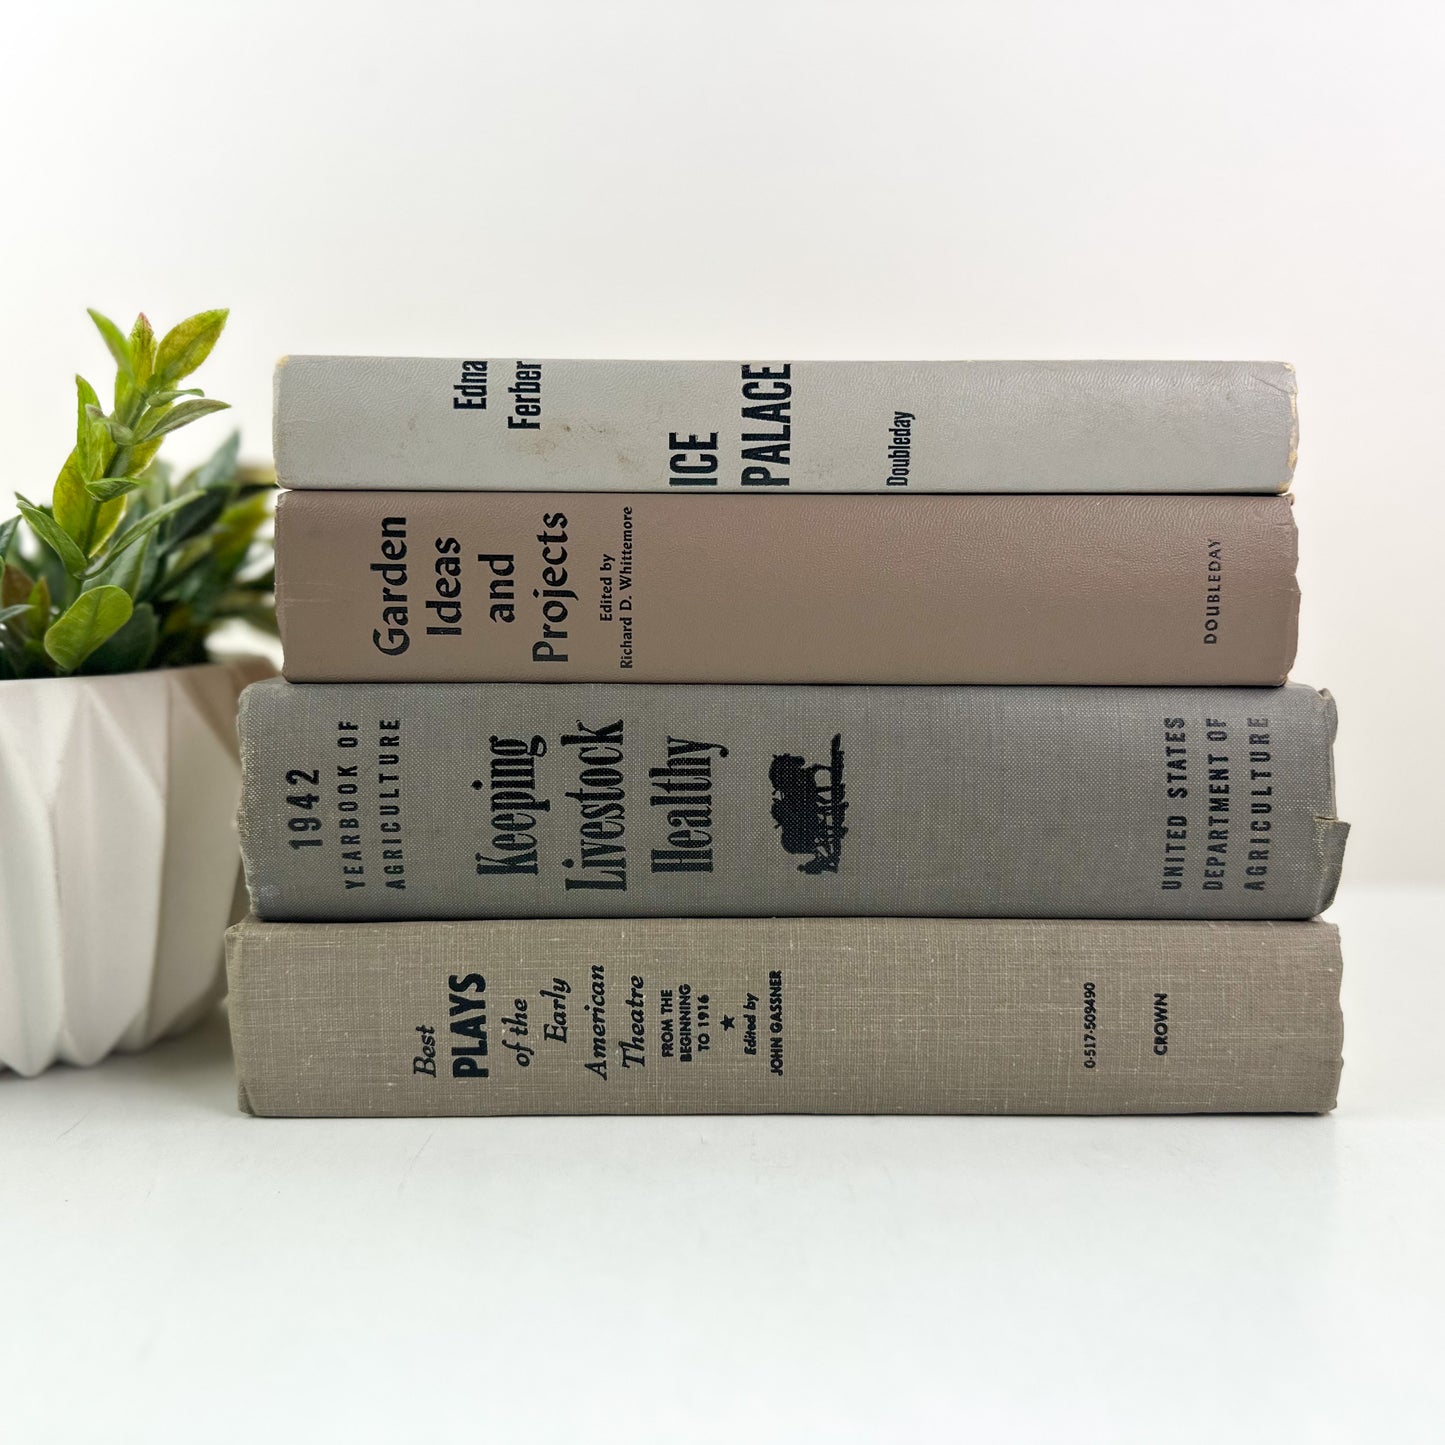 Classic Gray and Black Book Set